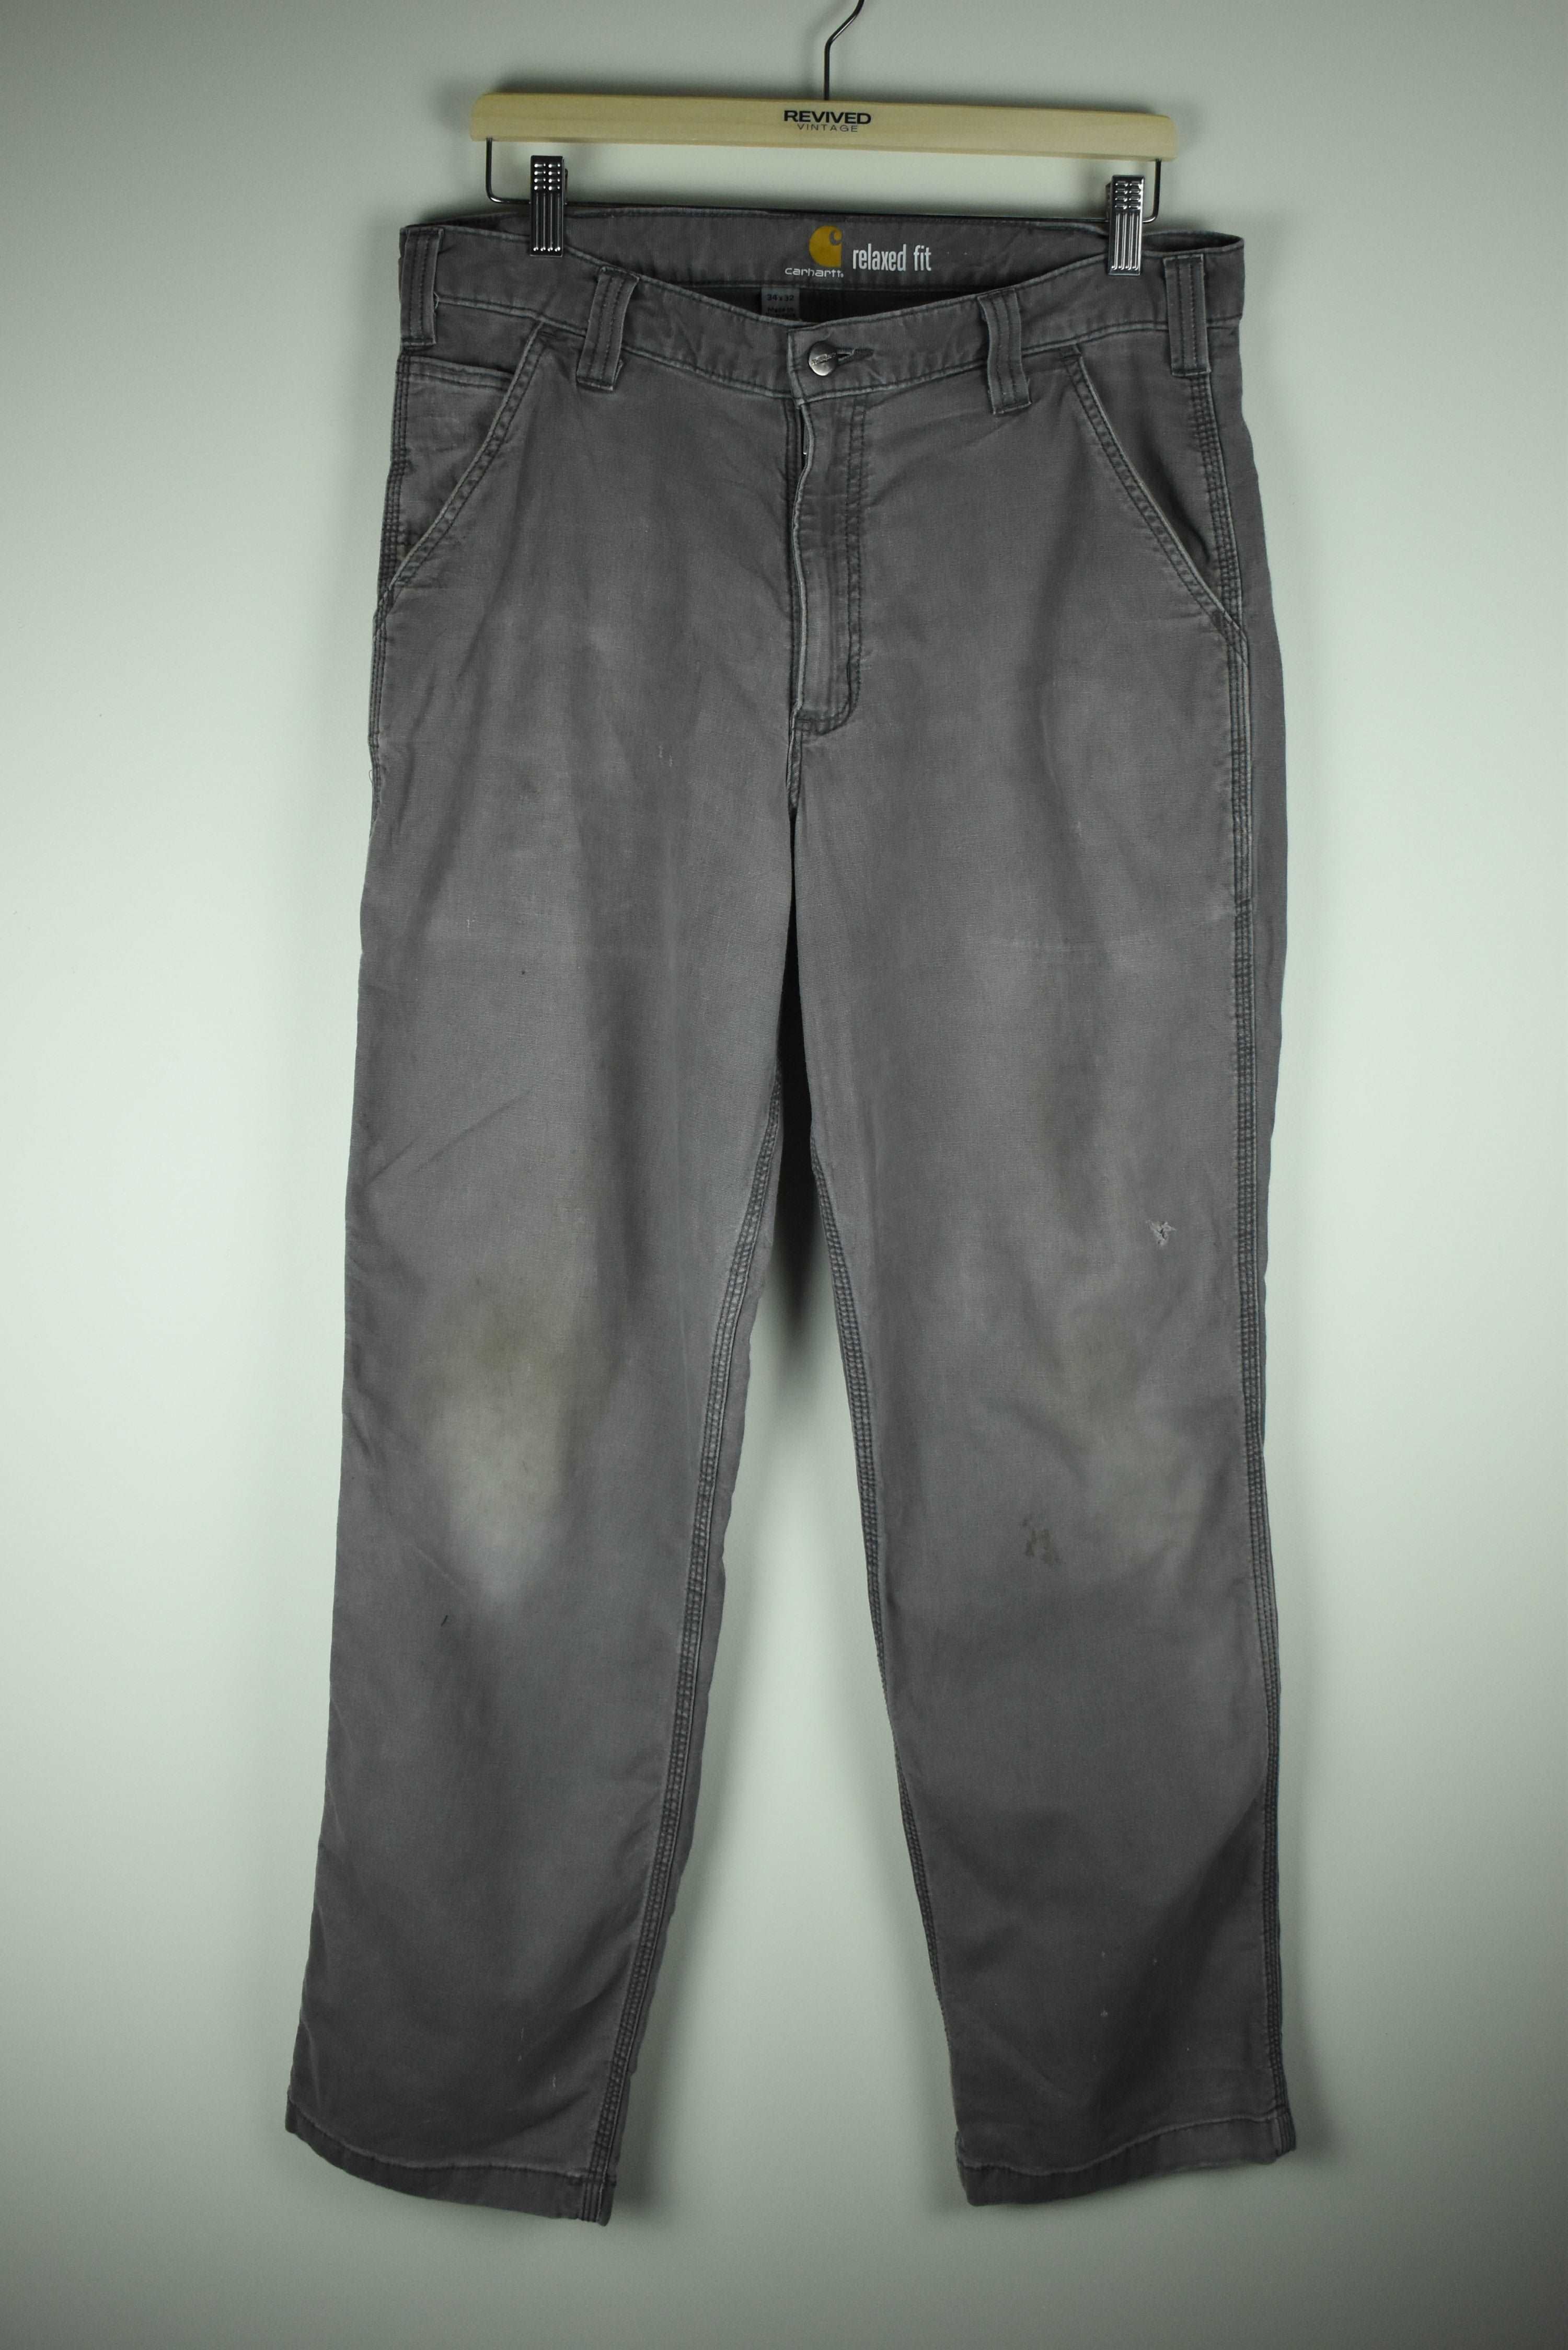 Vintage Carhartt Pants Relaxed Fit 34 x 32